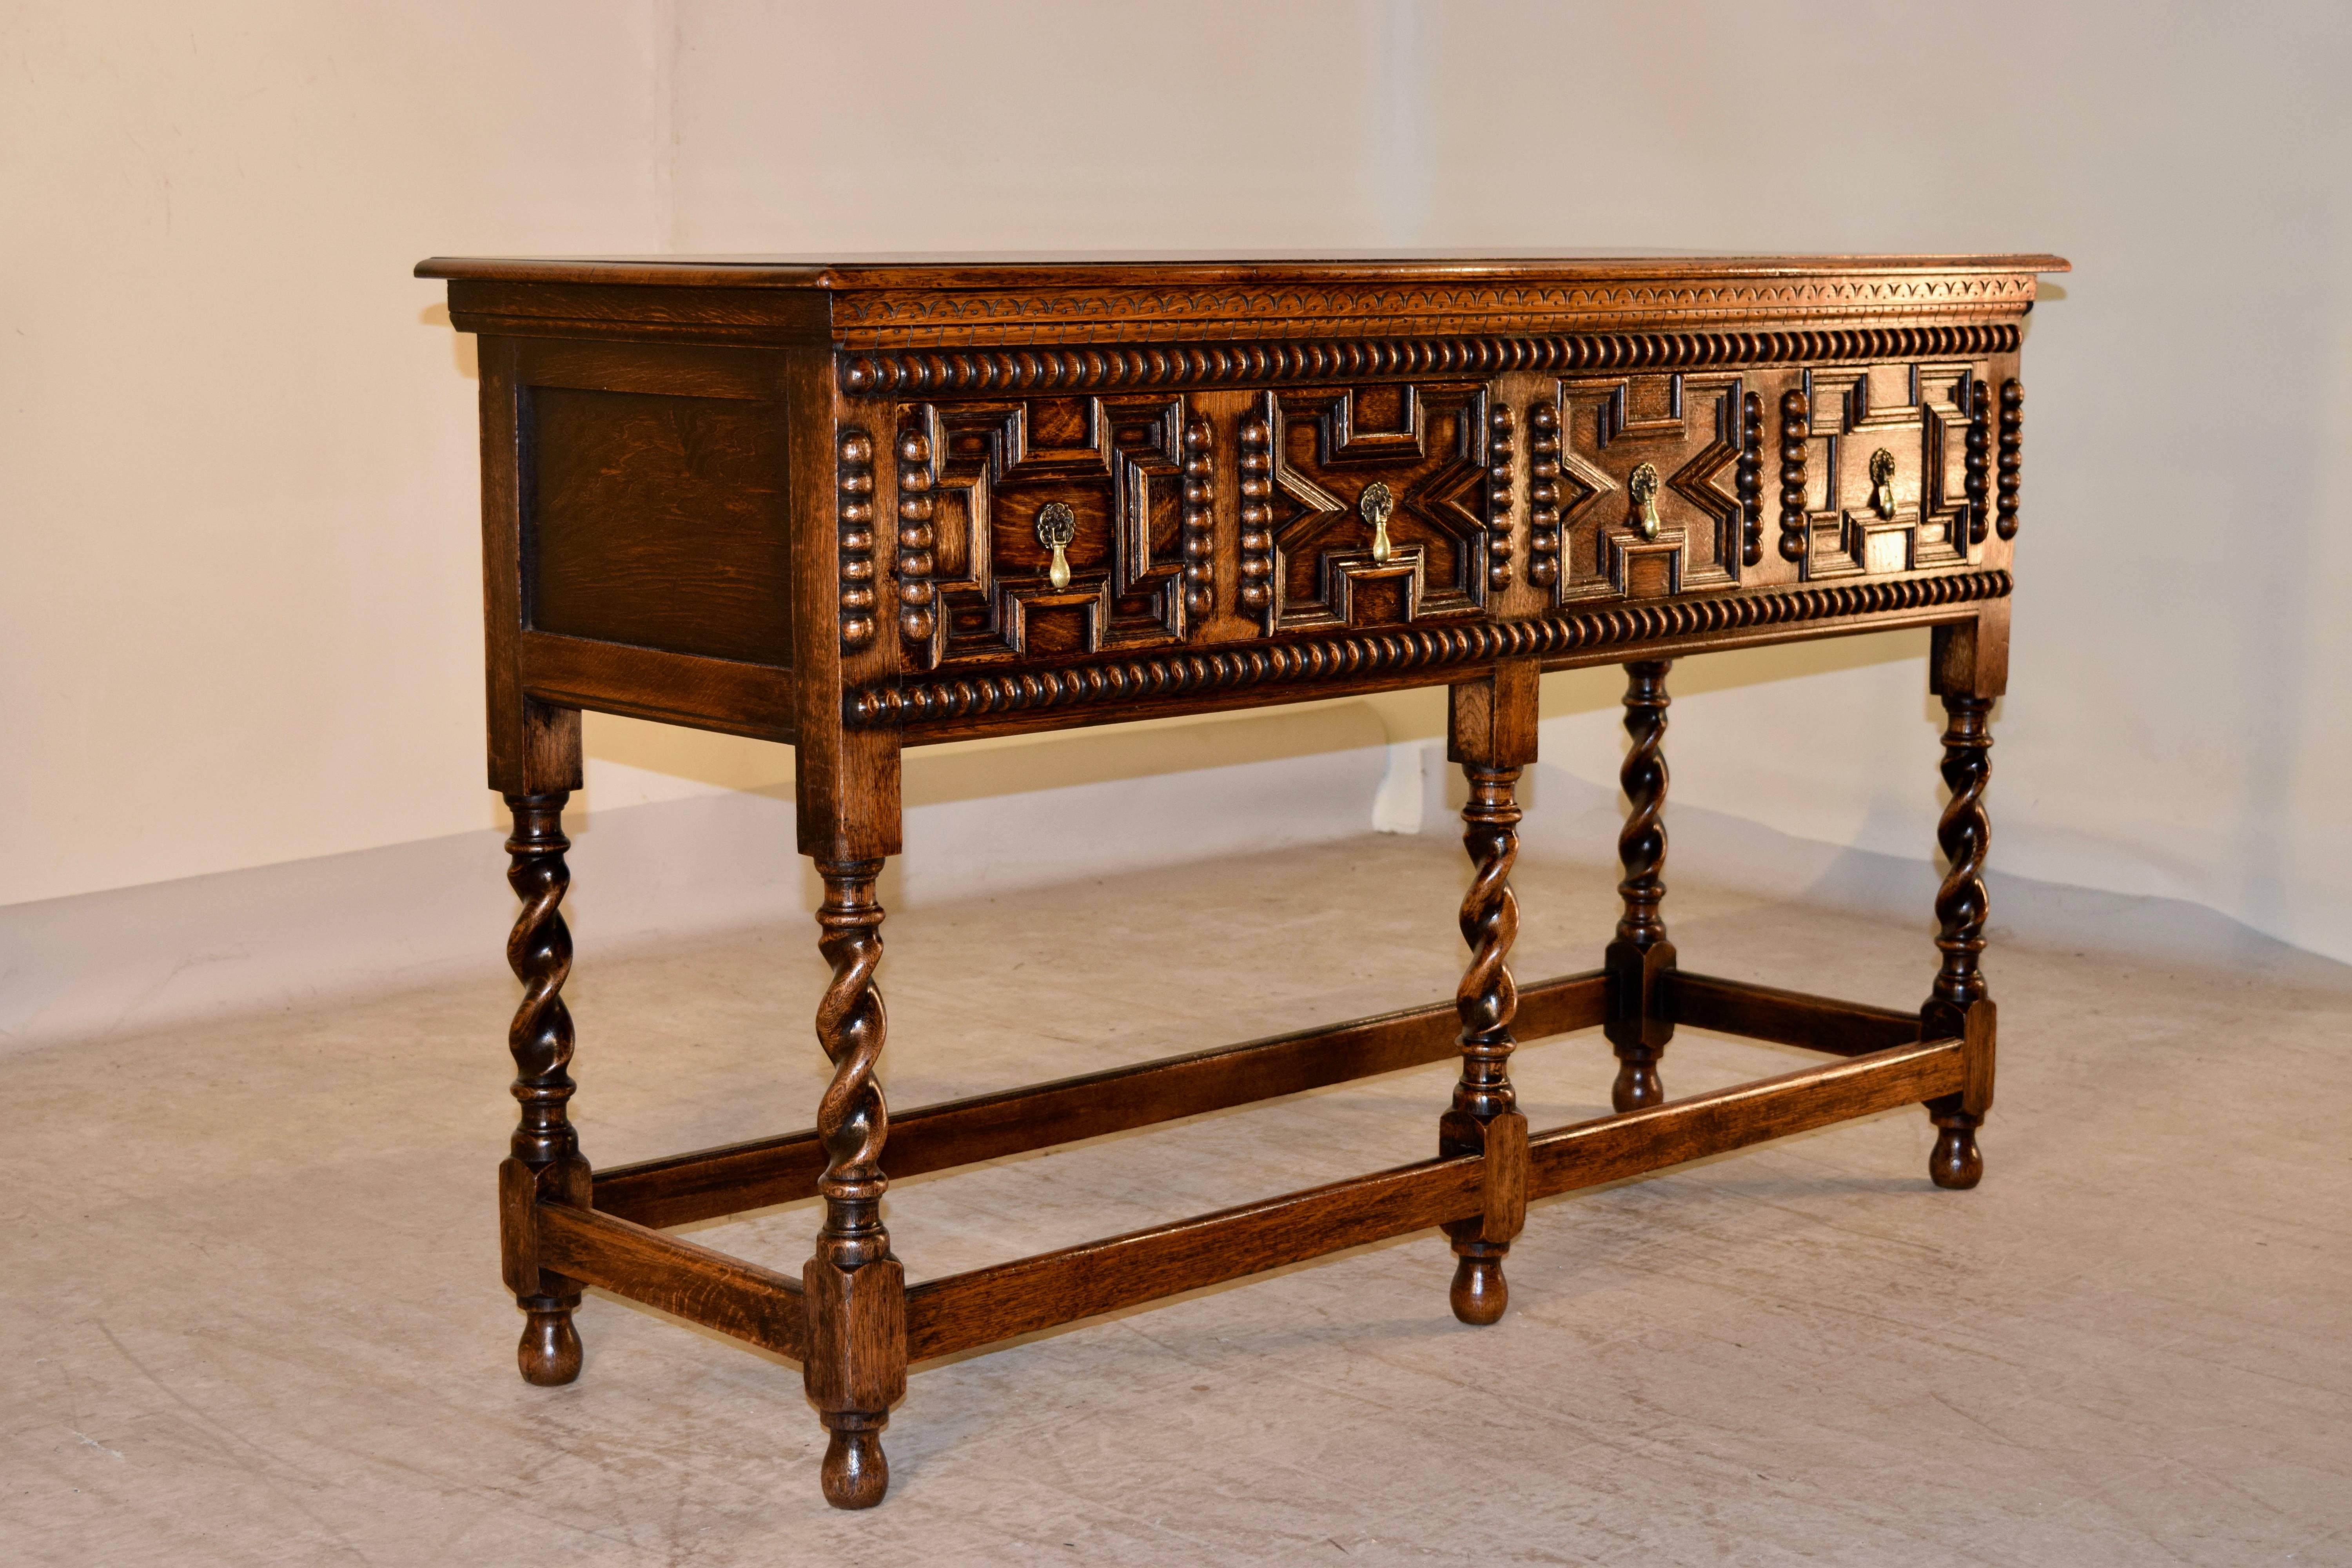 Late 19th century English oak sideboard with a beveled edge around the top, following down to two drawers in the front with hand paneled drawer fronts with beading. The case has wonderfully hand carve details and embellishments. The legs are